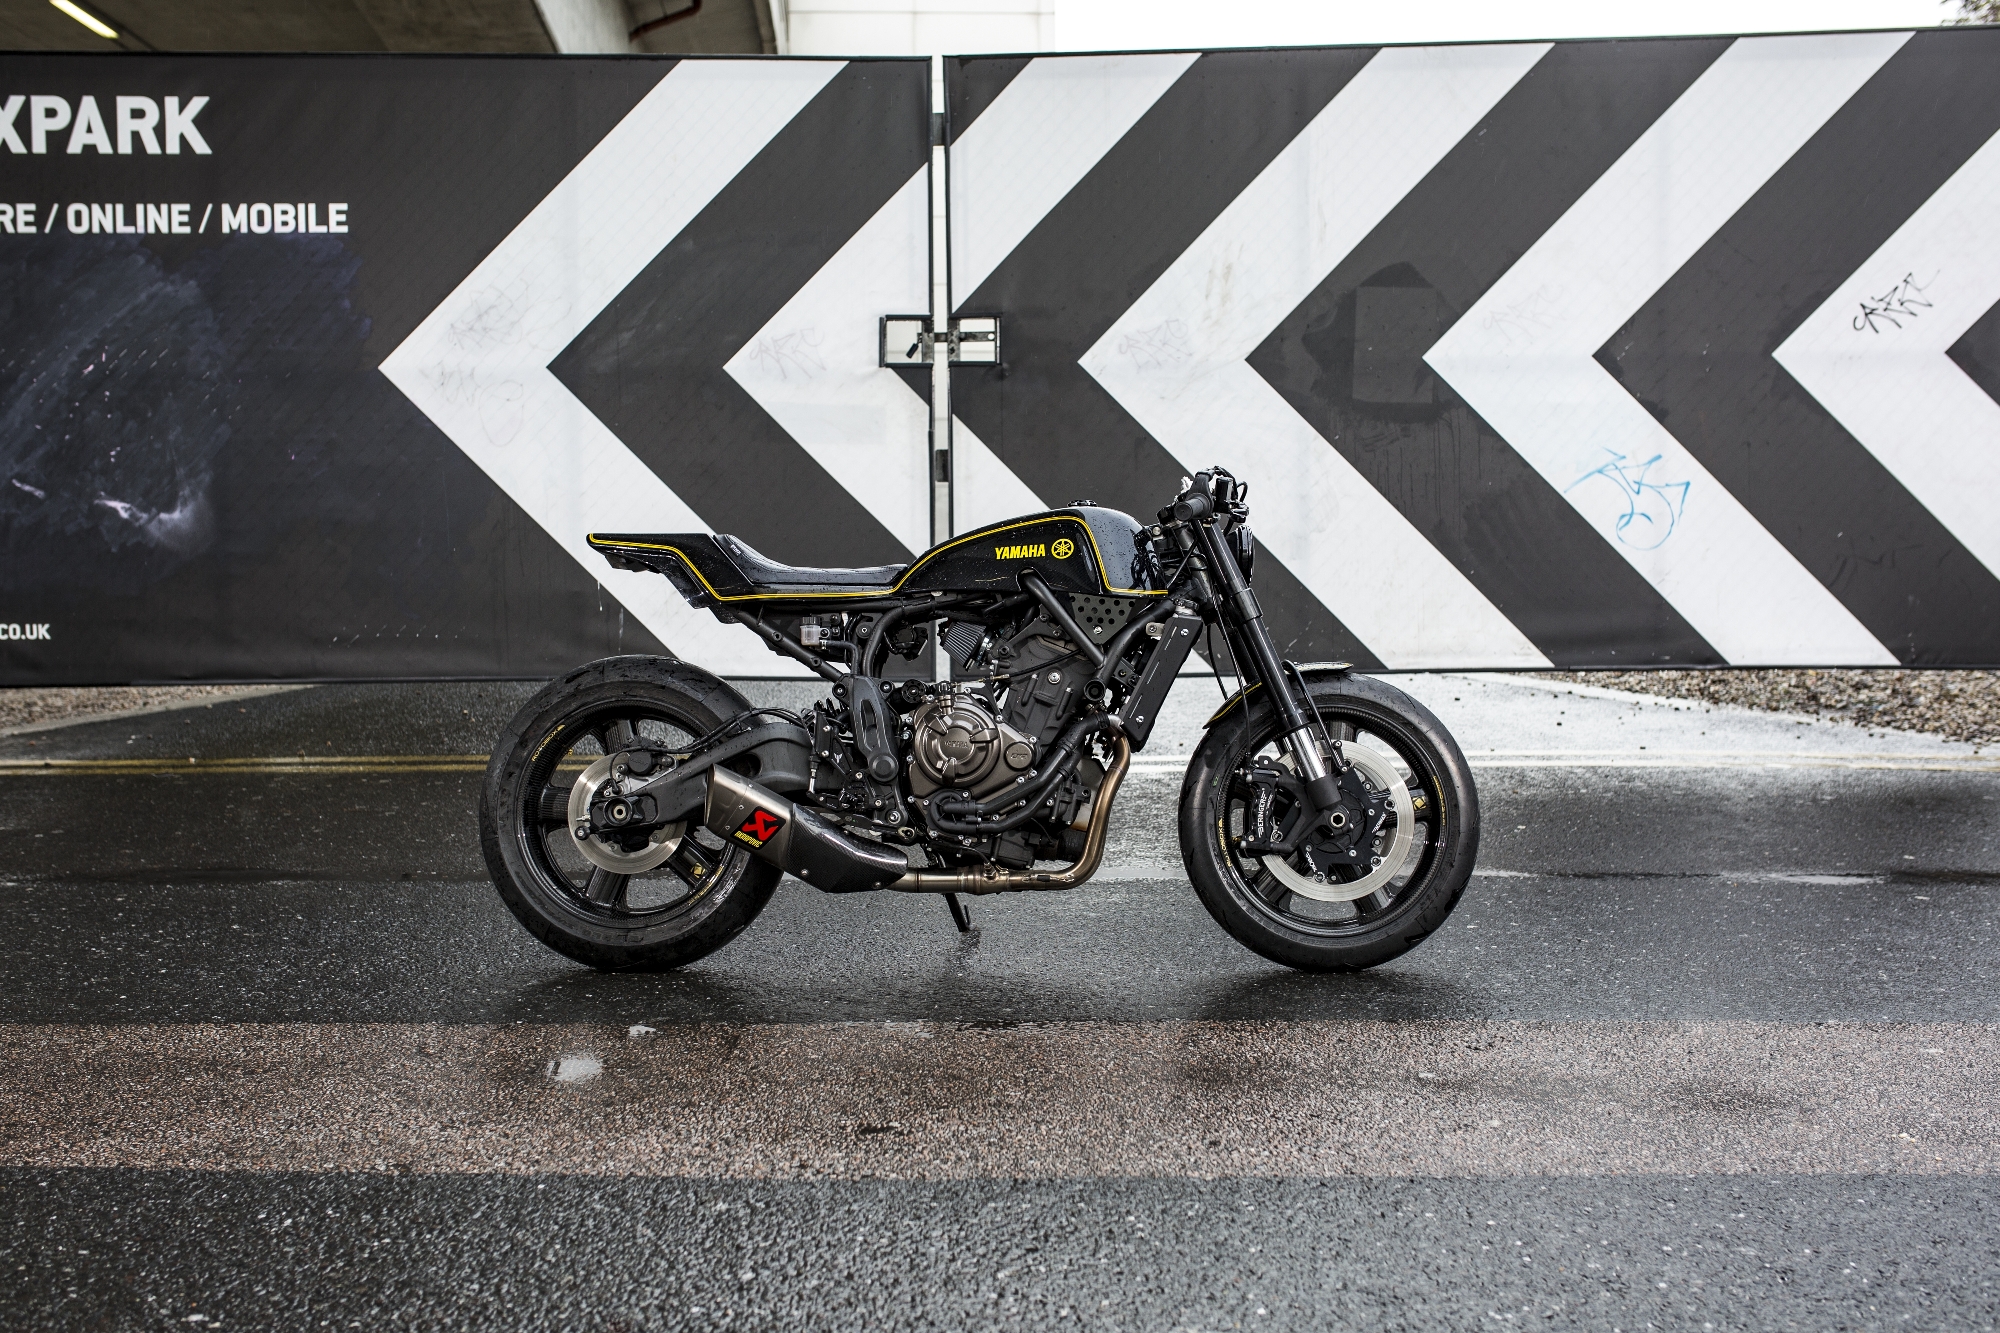 CADRE ARRIERE BMW Double AMORTISSEURS moto BMW Série-R CAFE RACER –  Ignition Custom Motorcycles